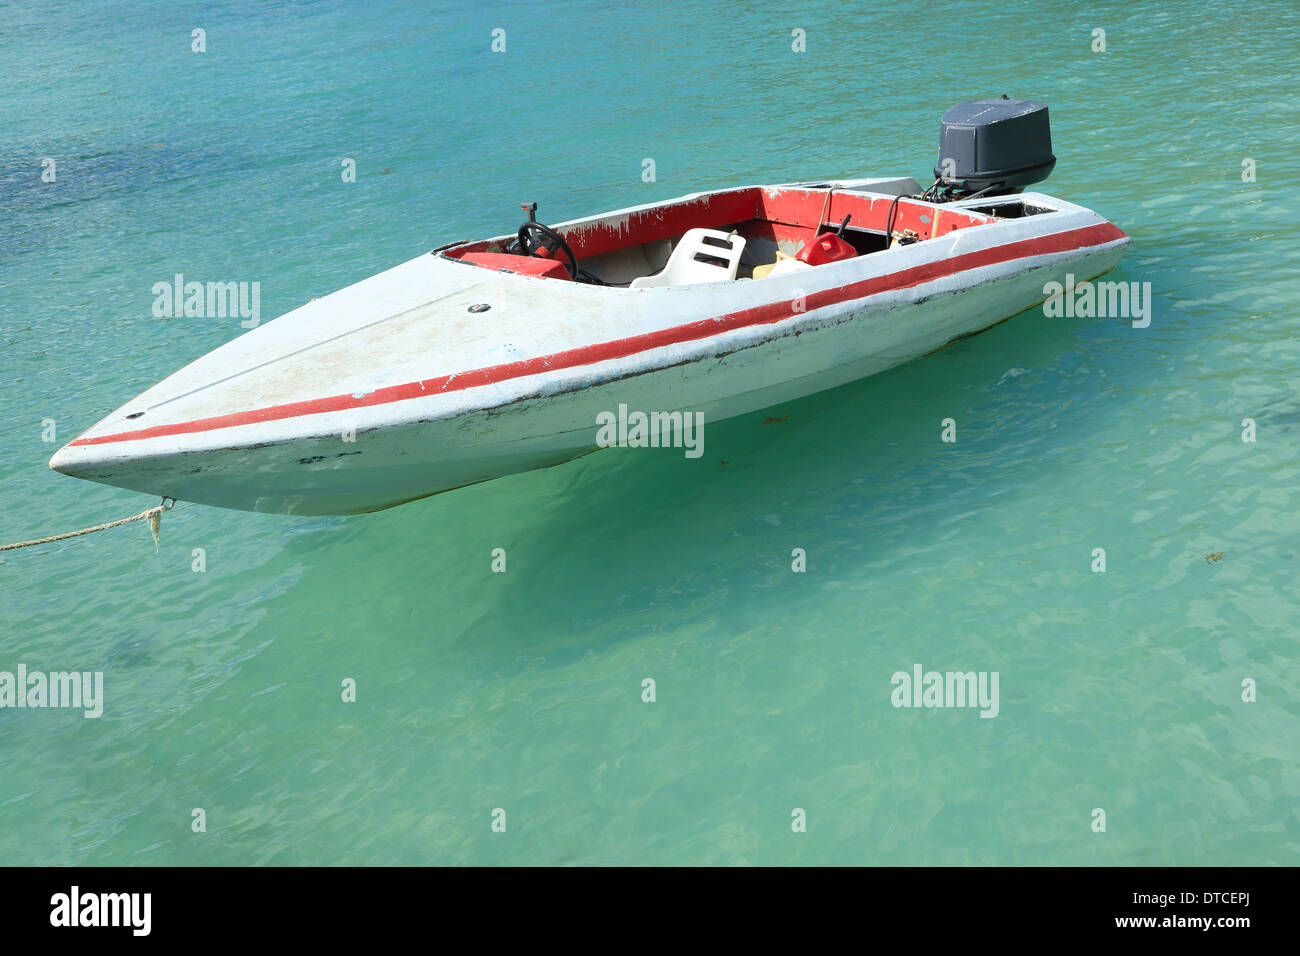 Motorboat on blue water in a sunny day Stock Photo